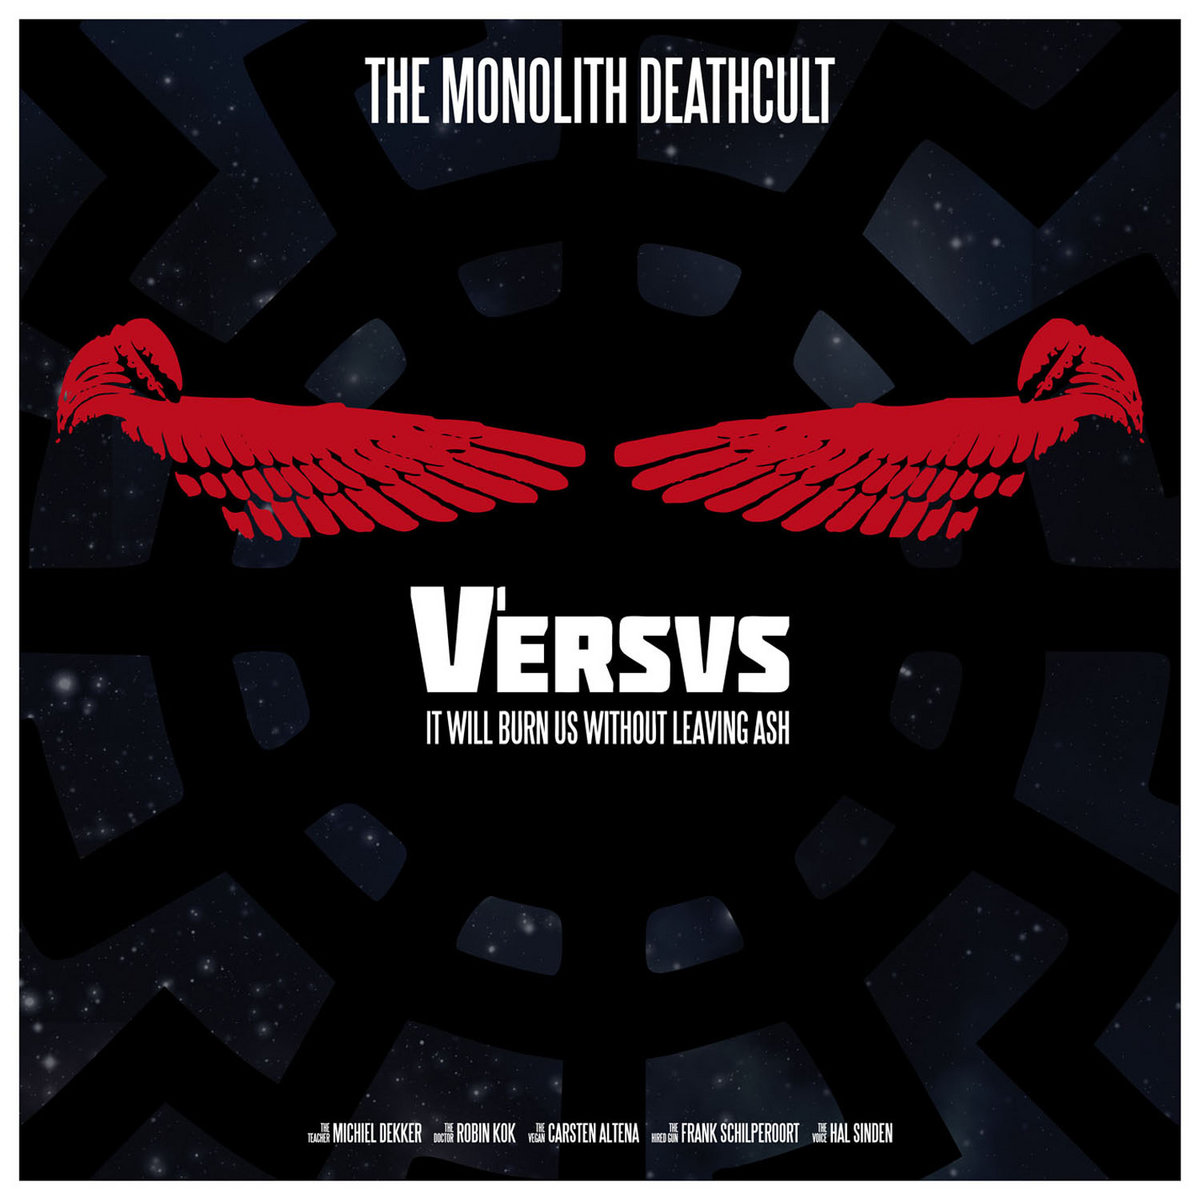 The Monolith Deathcult-V1 Versus  It Will Burn Us Without Leaving Ash-(HHR 2017-17)-CD-FLAC-2017-WRE Download